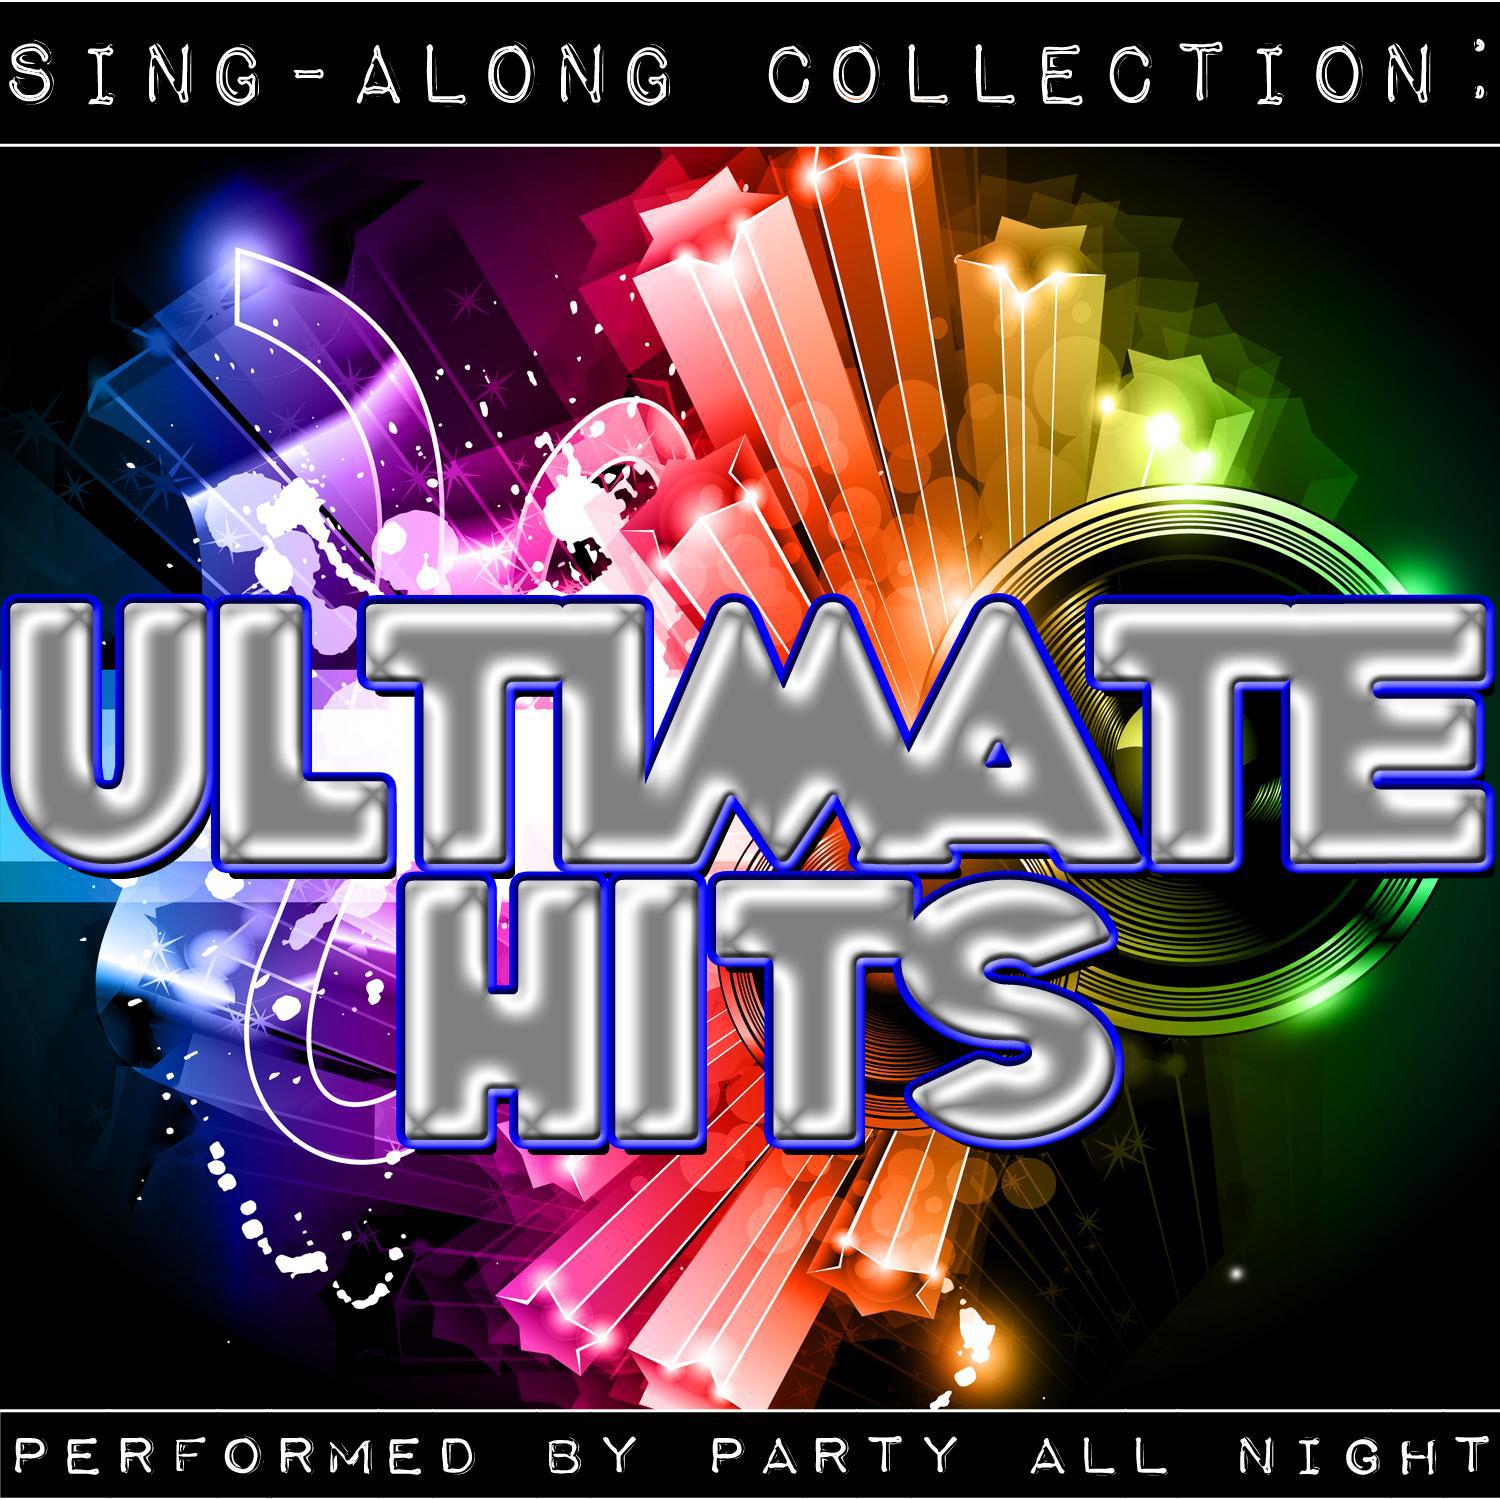 Sing-Along Collection: Ultimate Hits